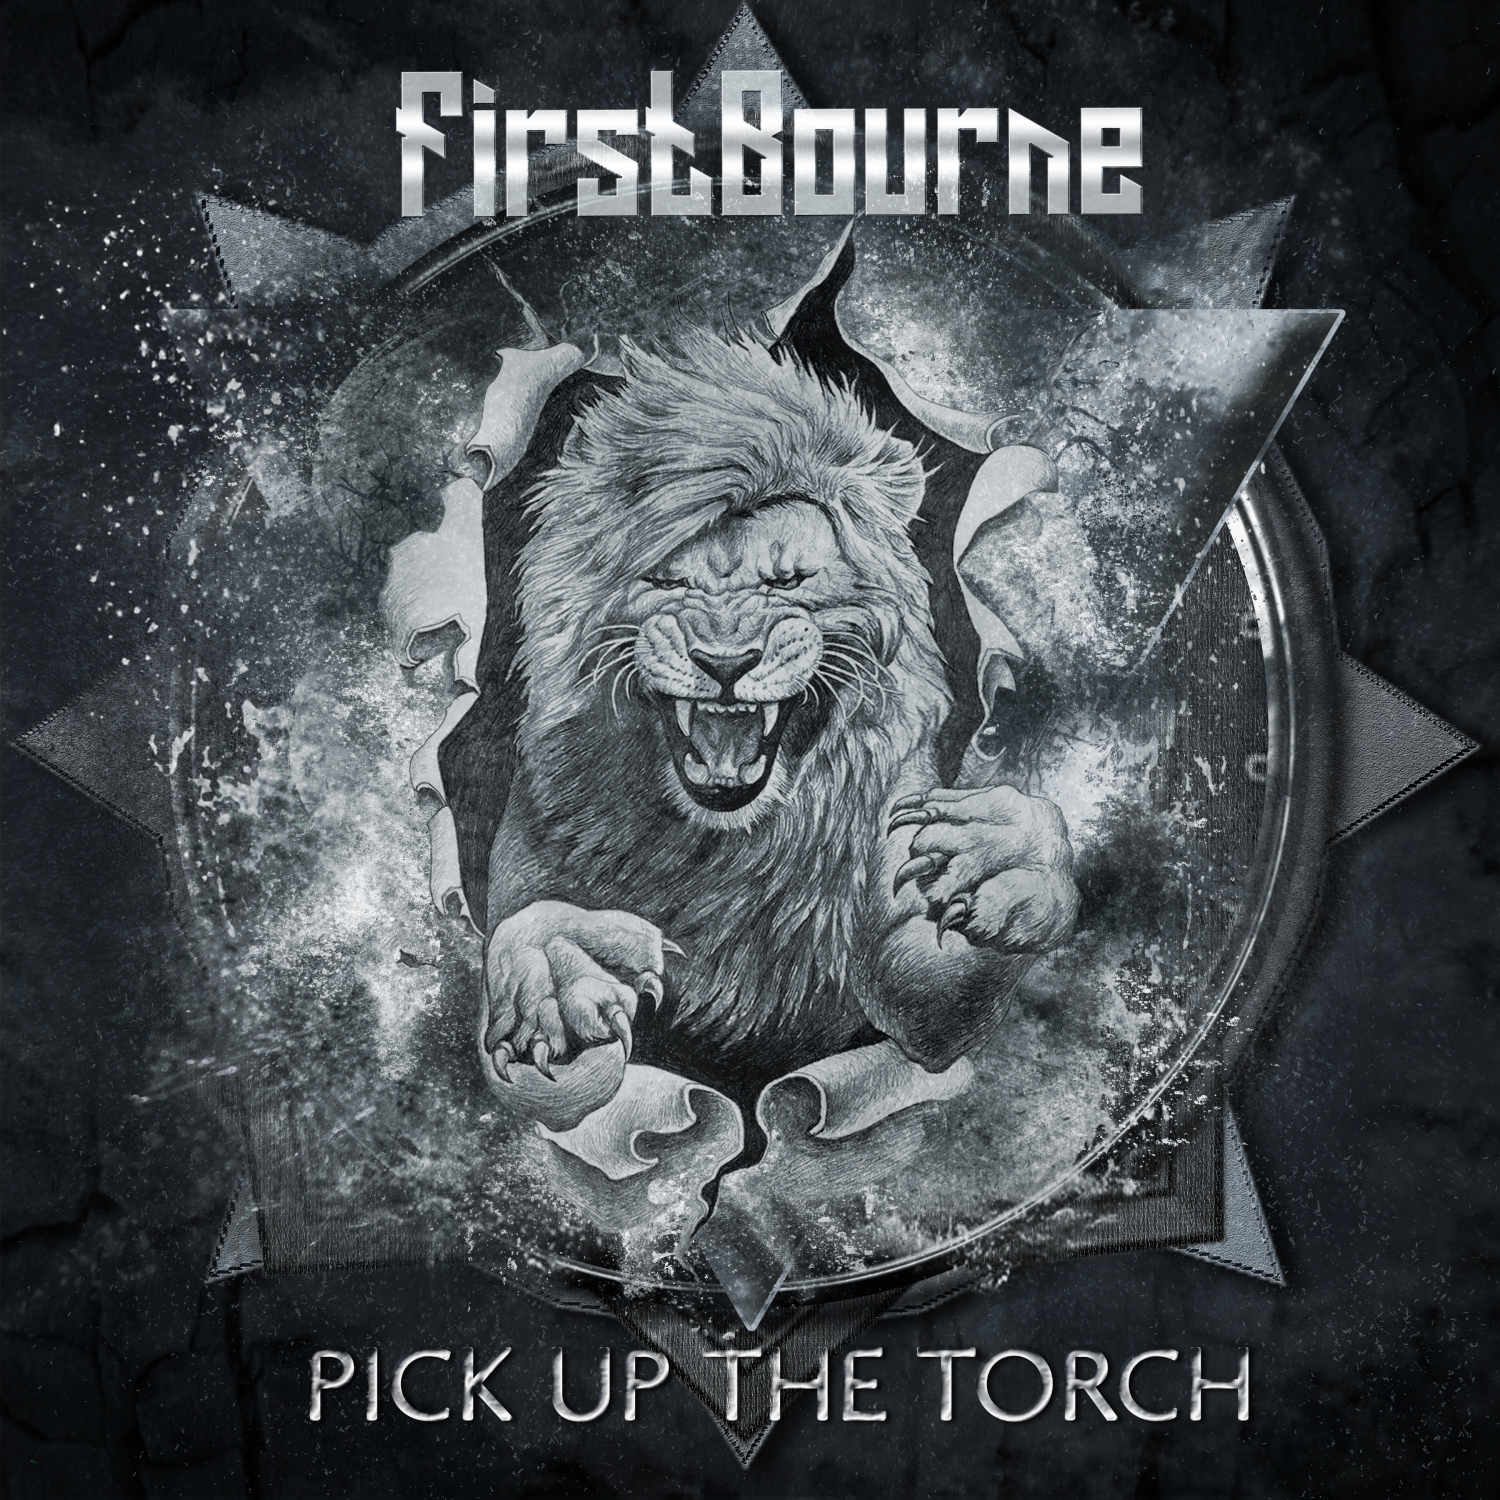 Metal-Review: FIRSTBOURNE – PICK UP THE TORCH